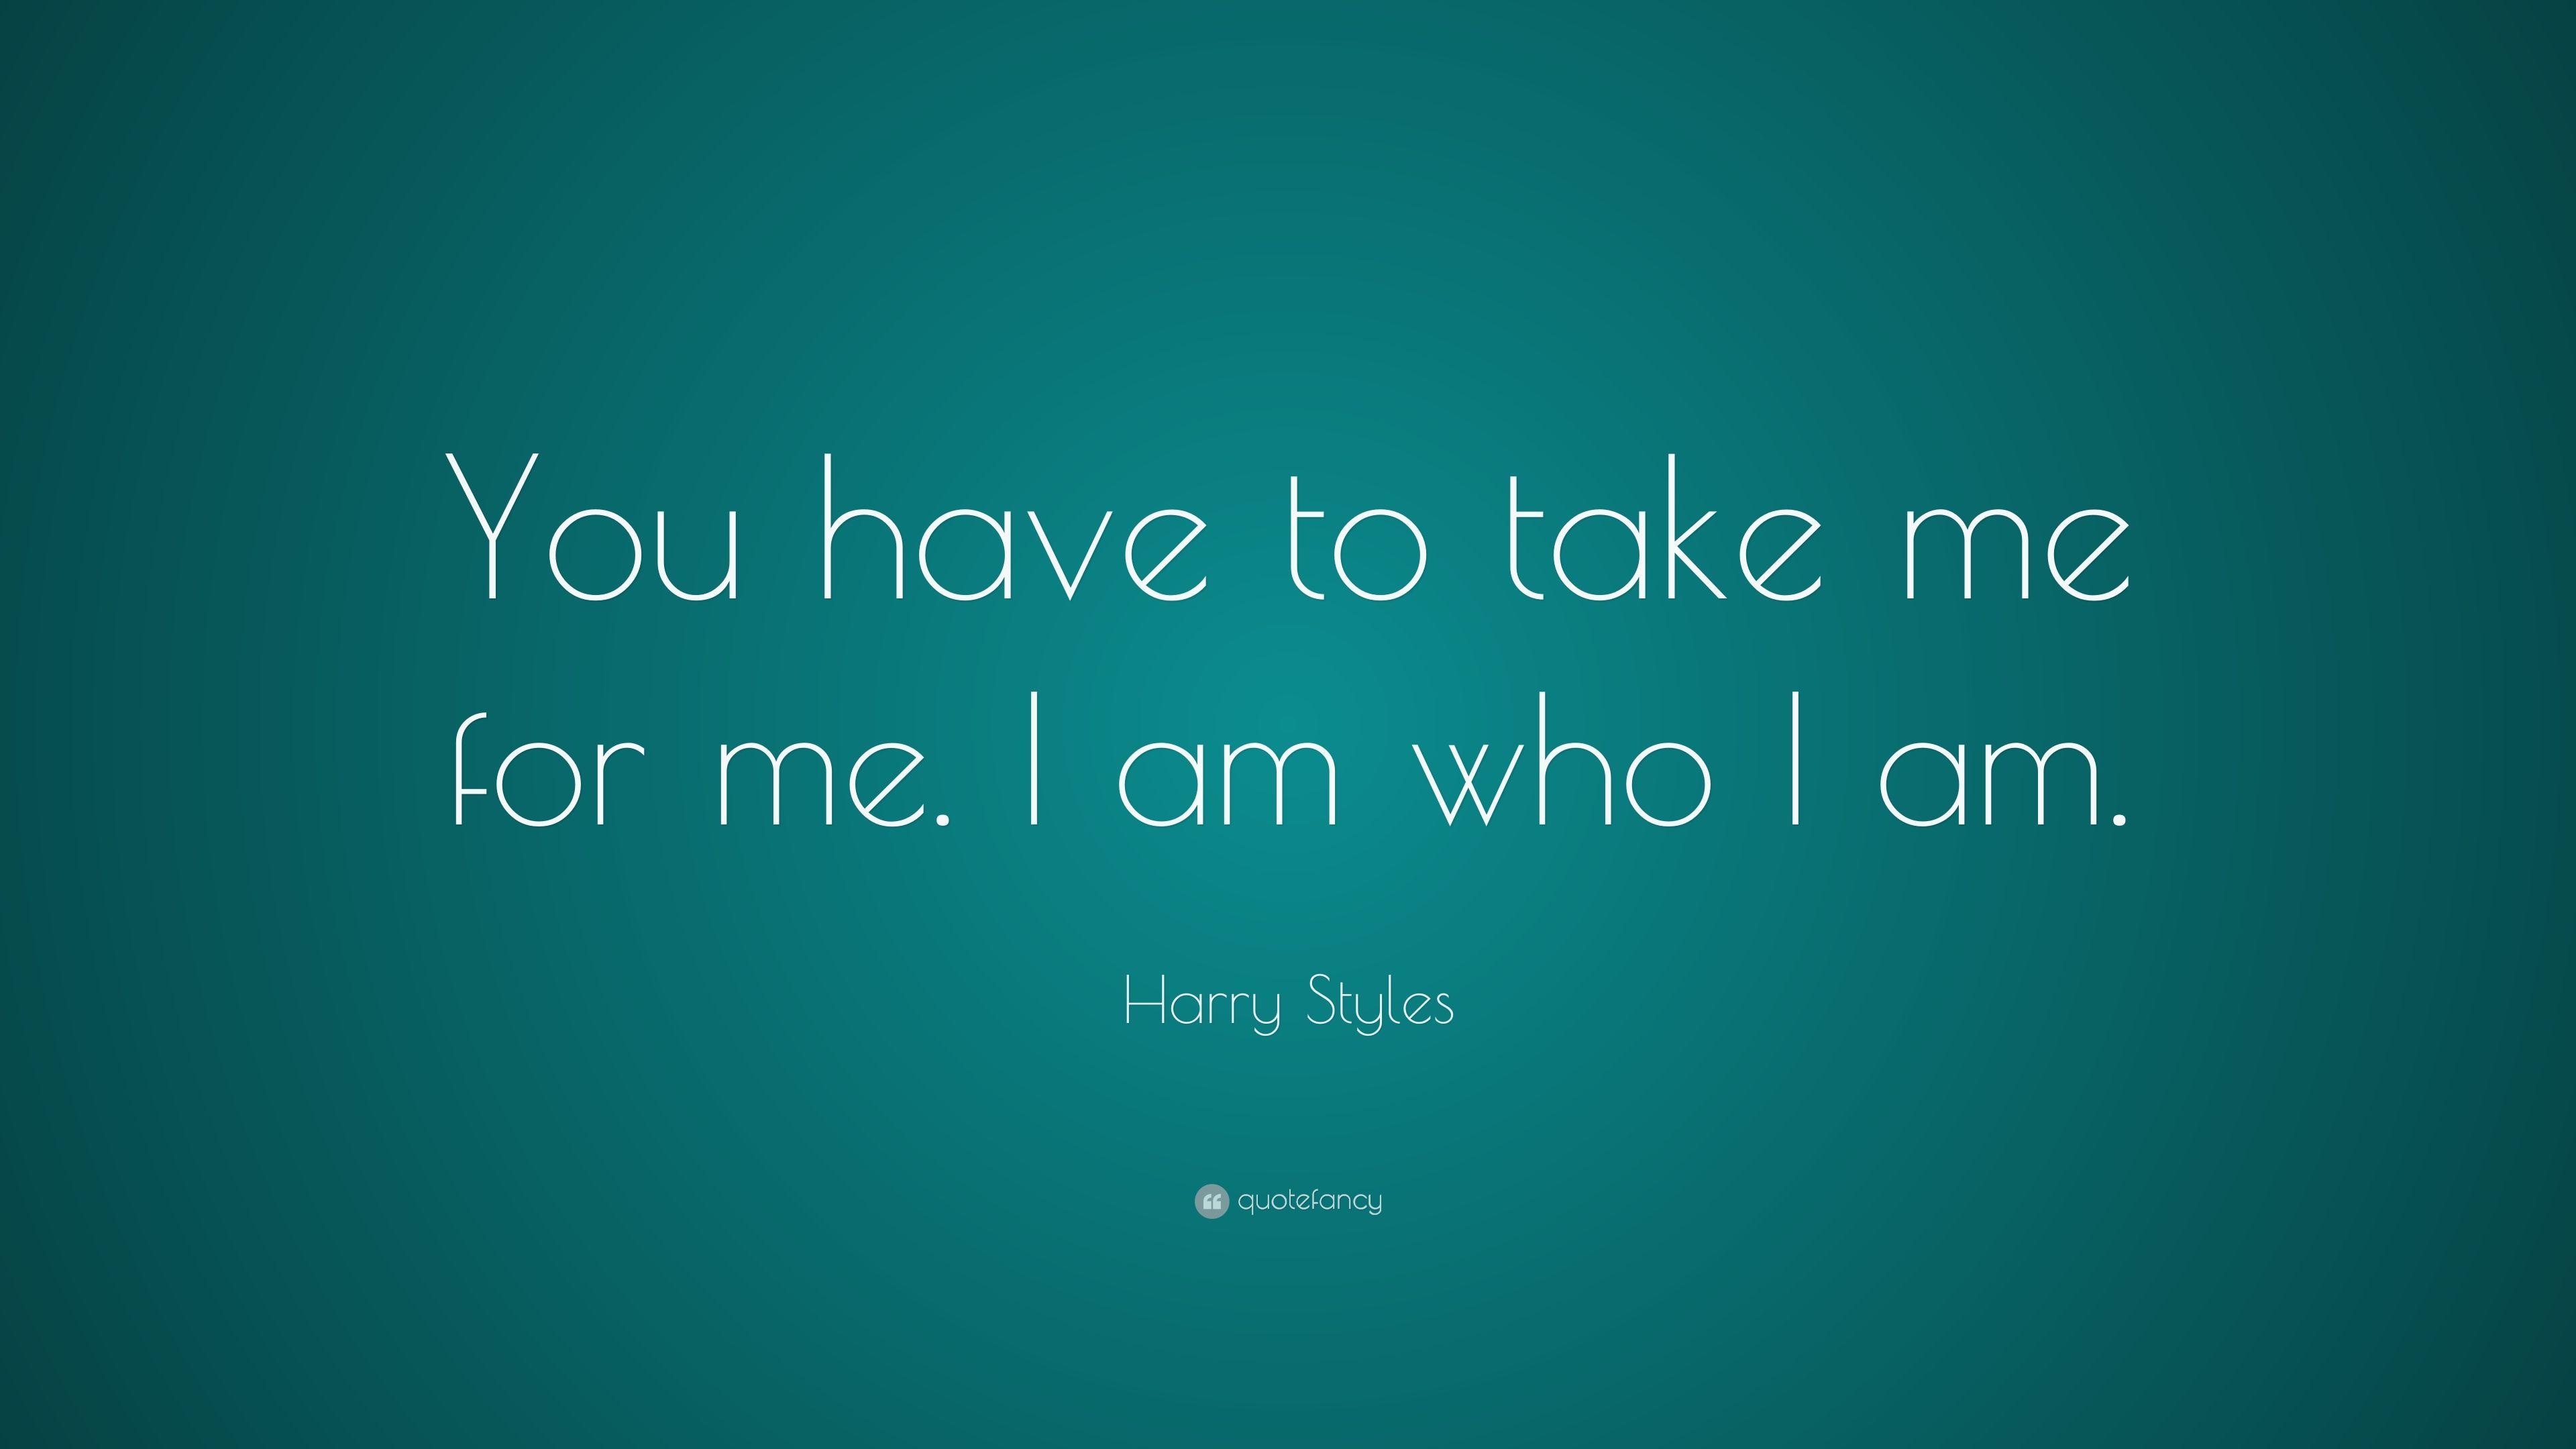 Harry Styles Quote: "You have to take me for me. 